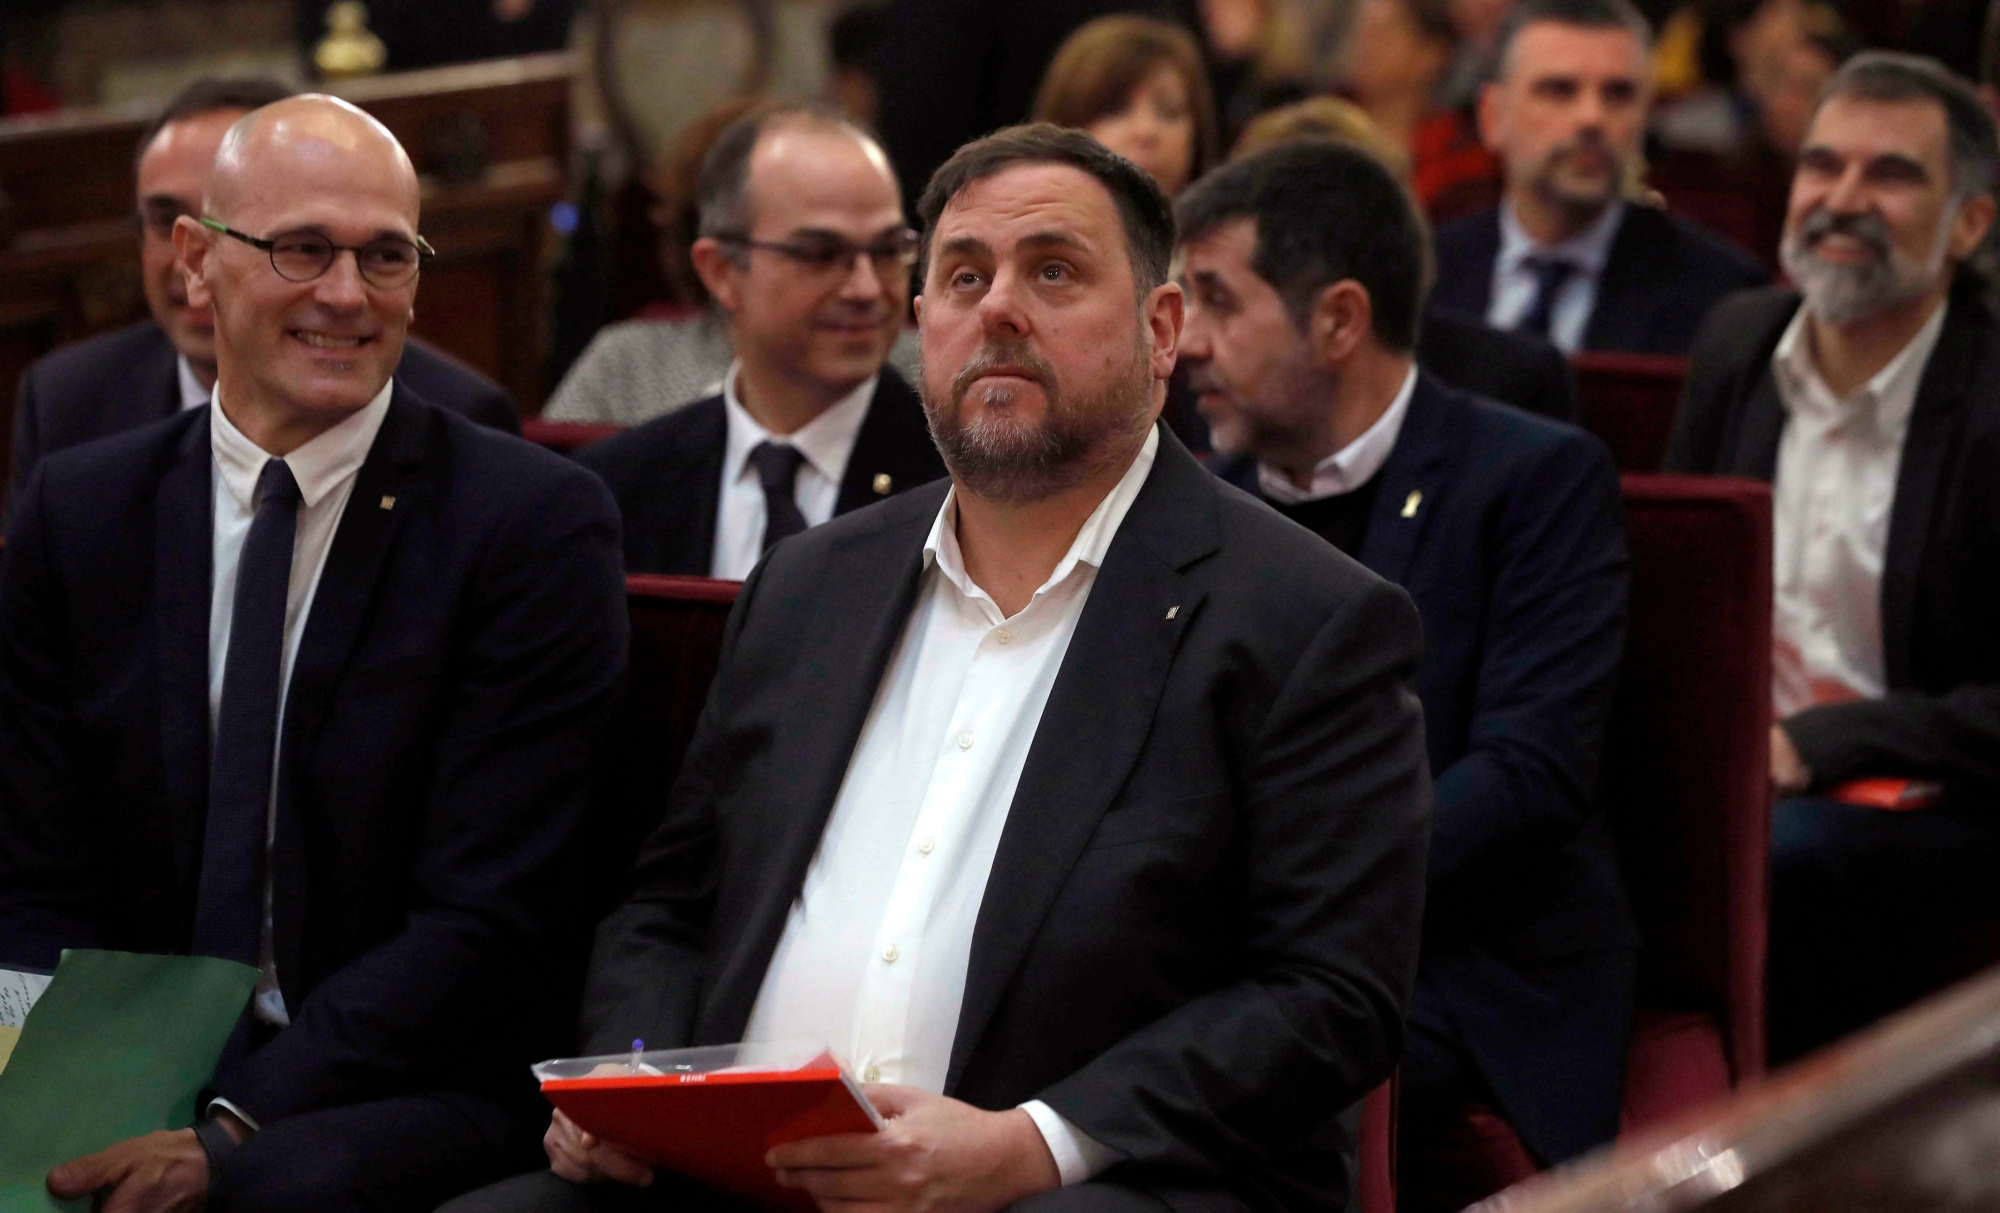 Catalan regional Vice-President, Oriol Junqueras, center, next to Catalan former Cabinet member Raul Romeva, left, during the trial at the Spanish Supreme Court in Madrid, Tuesday, Feb. 12, 2019. Spain is bracing for the nation's most sensitive trial in four decades of democracy this week, with a dozen Catalan separatists facing charges including rebellion over a failed secession bid in 2017. (J.J. Guillen/Pool via AP) Spain Catalonia Trial